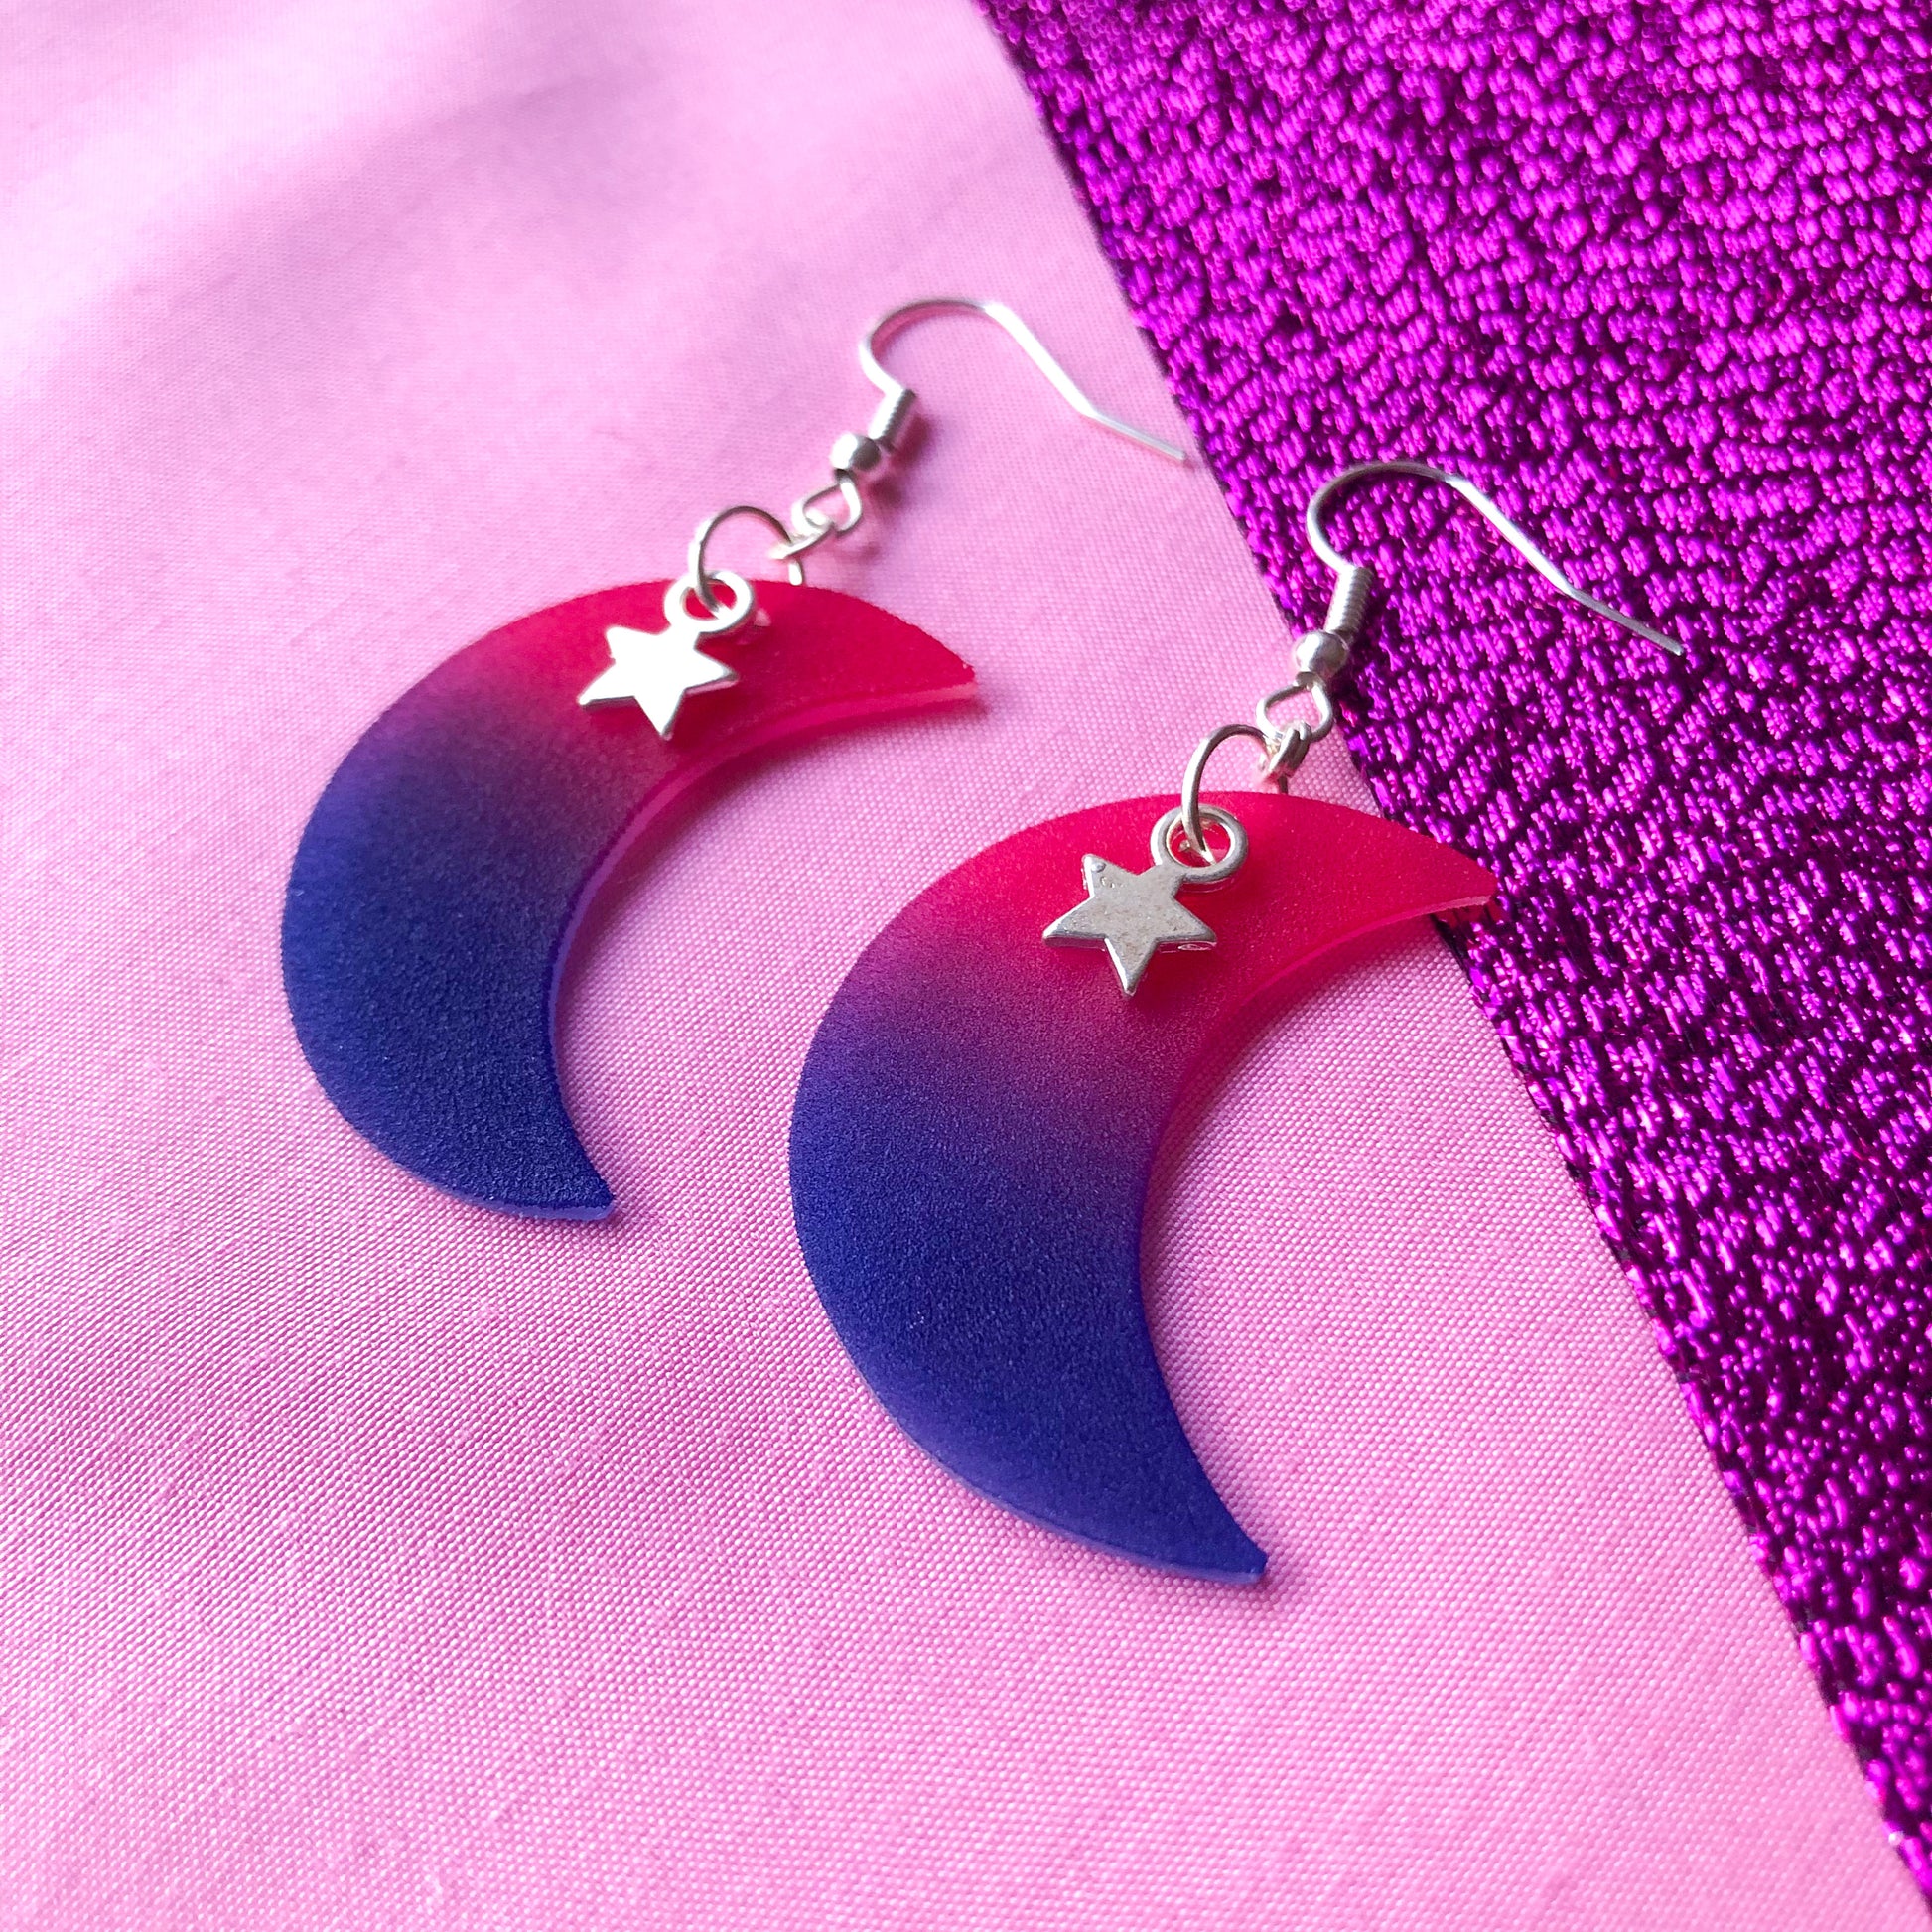 Crescent moon shrinky dink earrings in bisexual pride flag colours with a silver star charm at the top.